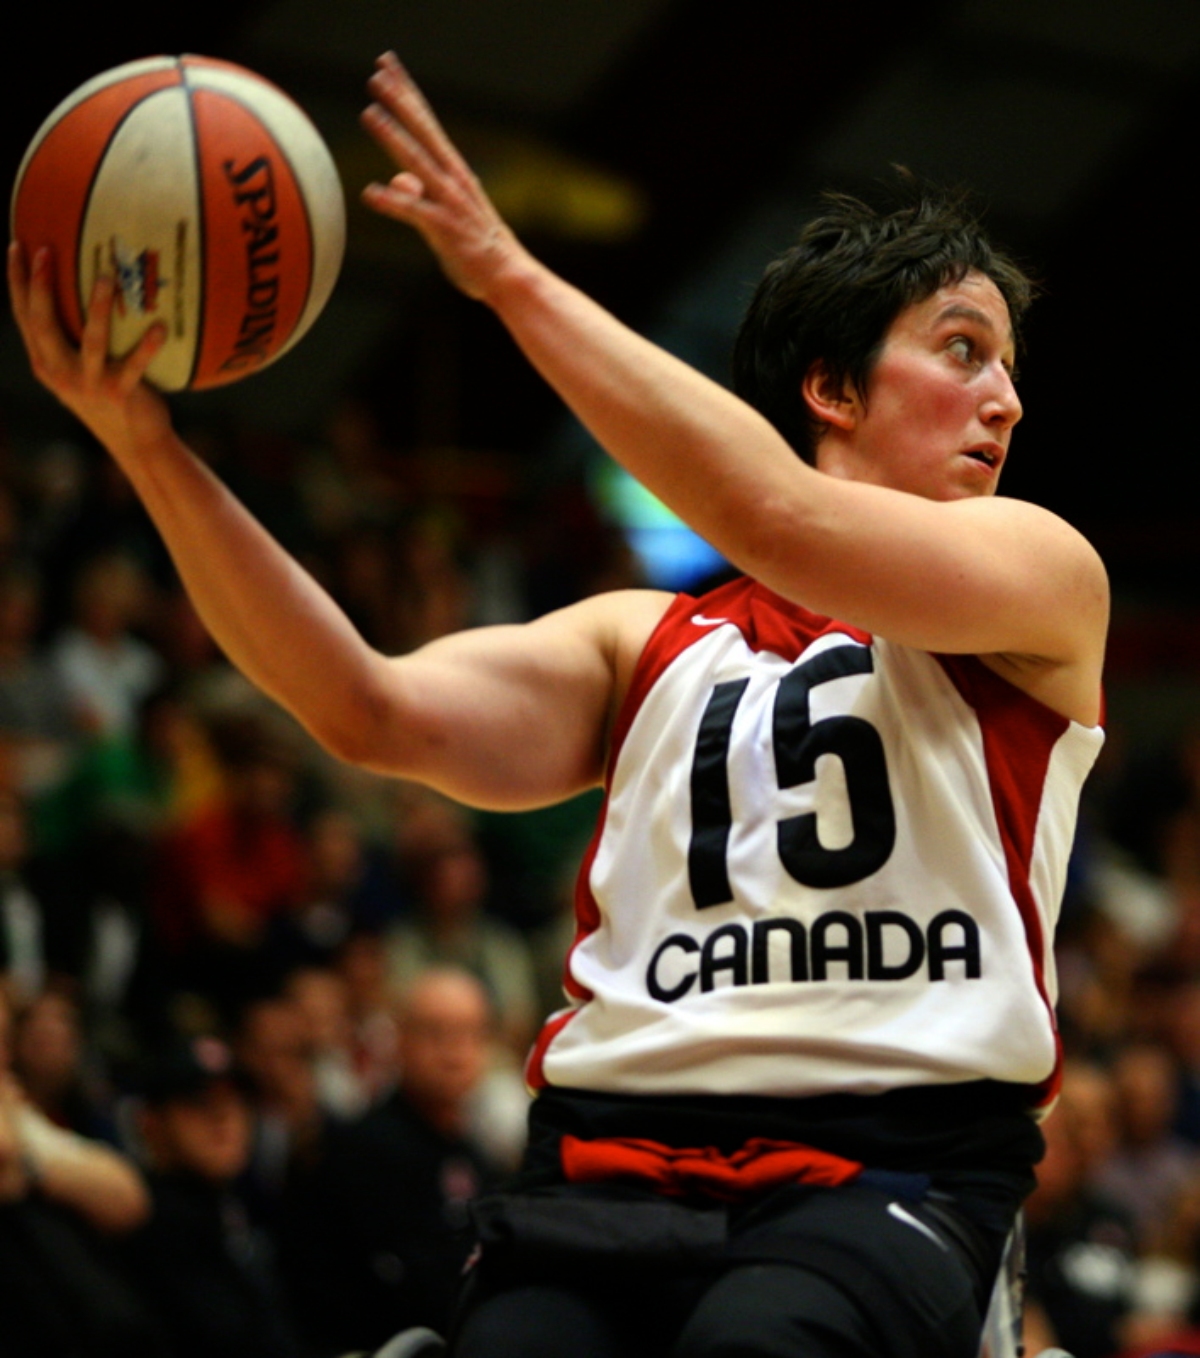 Danielle Peers competes at the 2006 Wheelchair Basketball World Championship in Amsterdam.